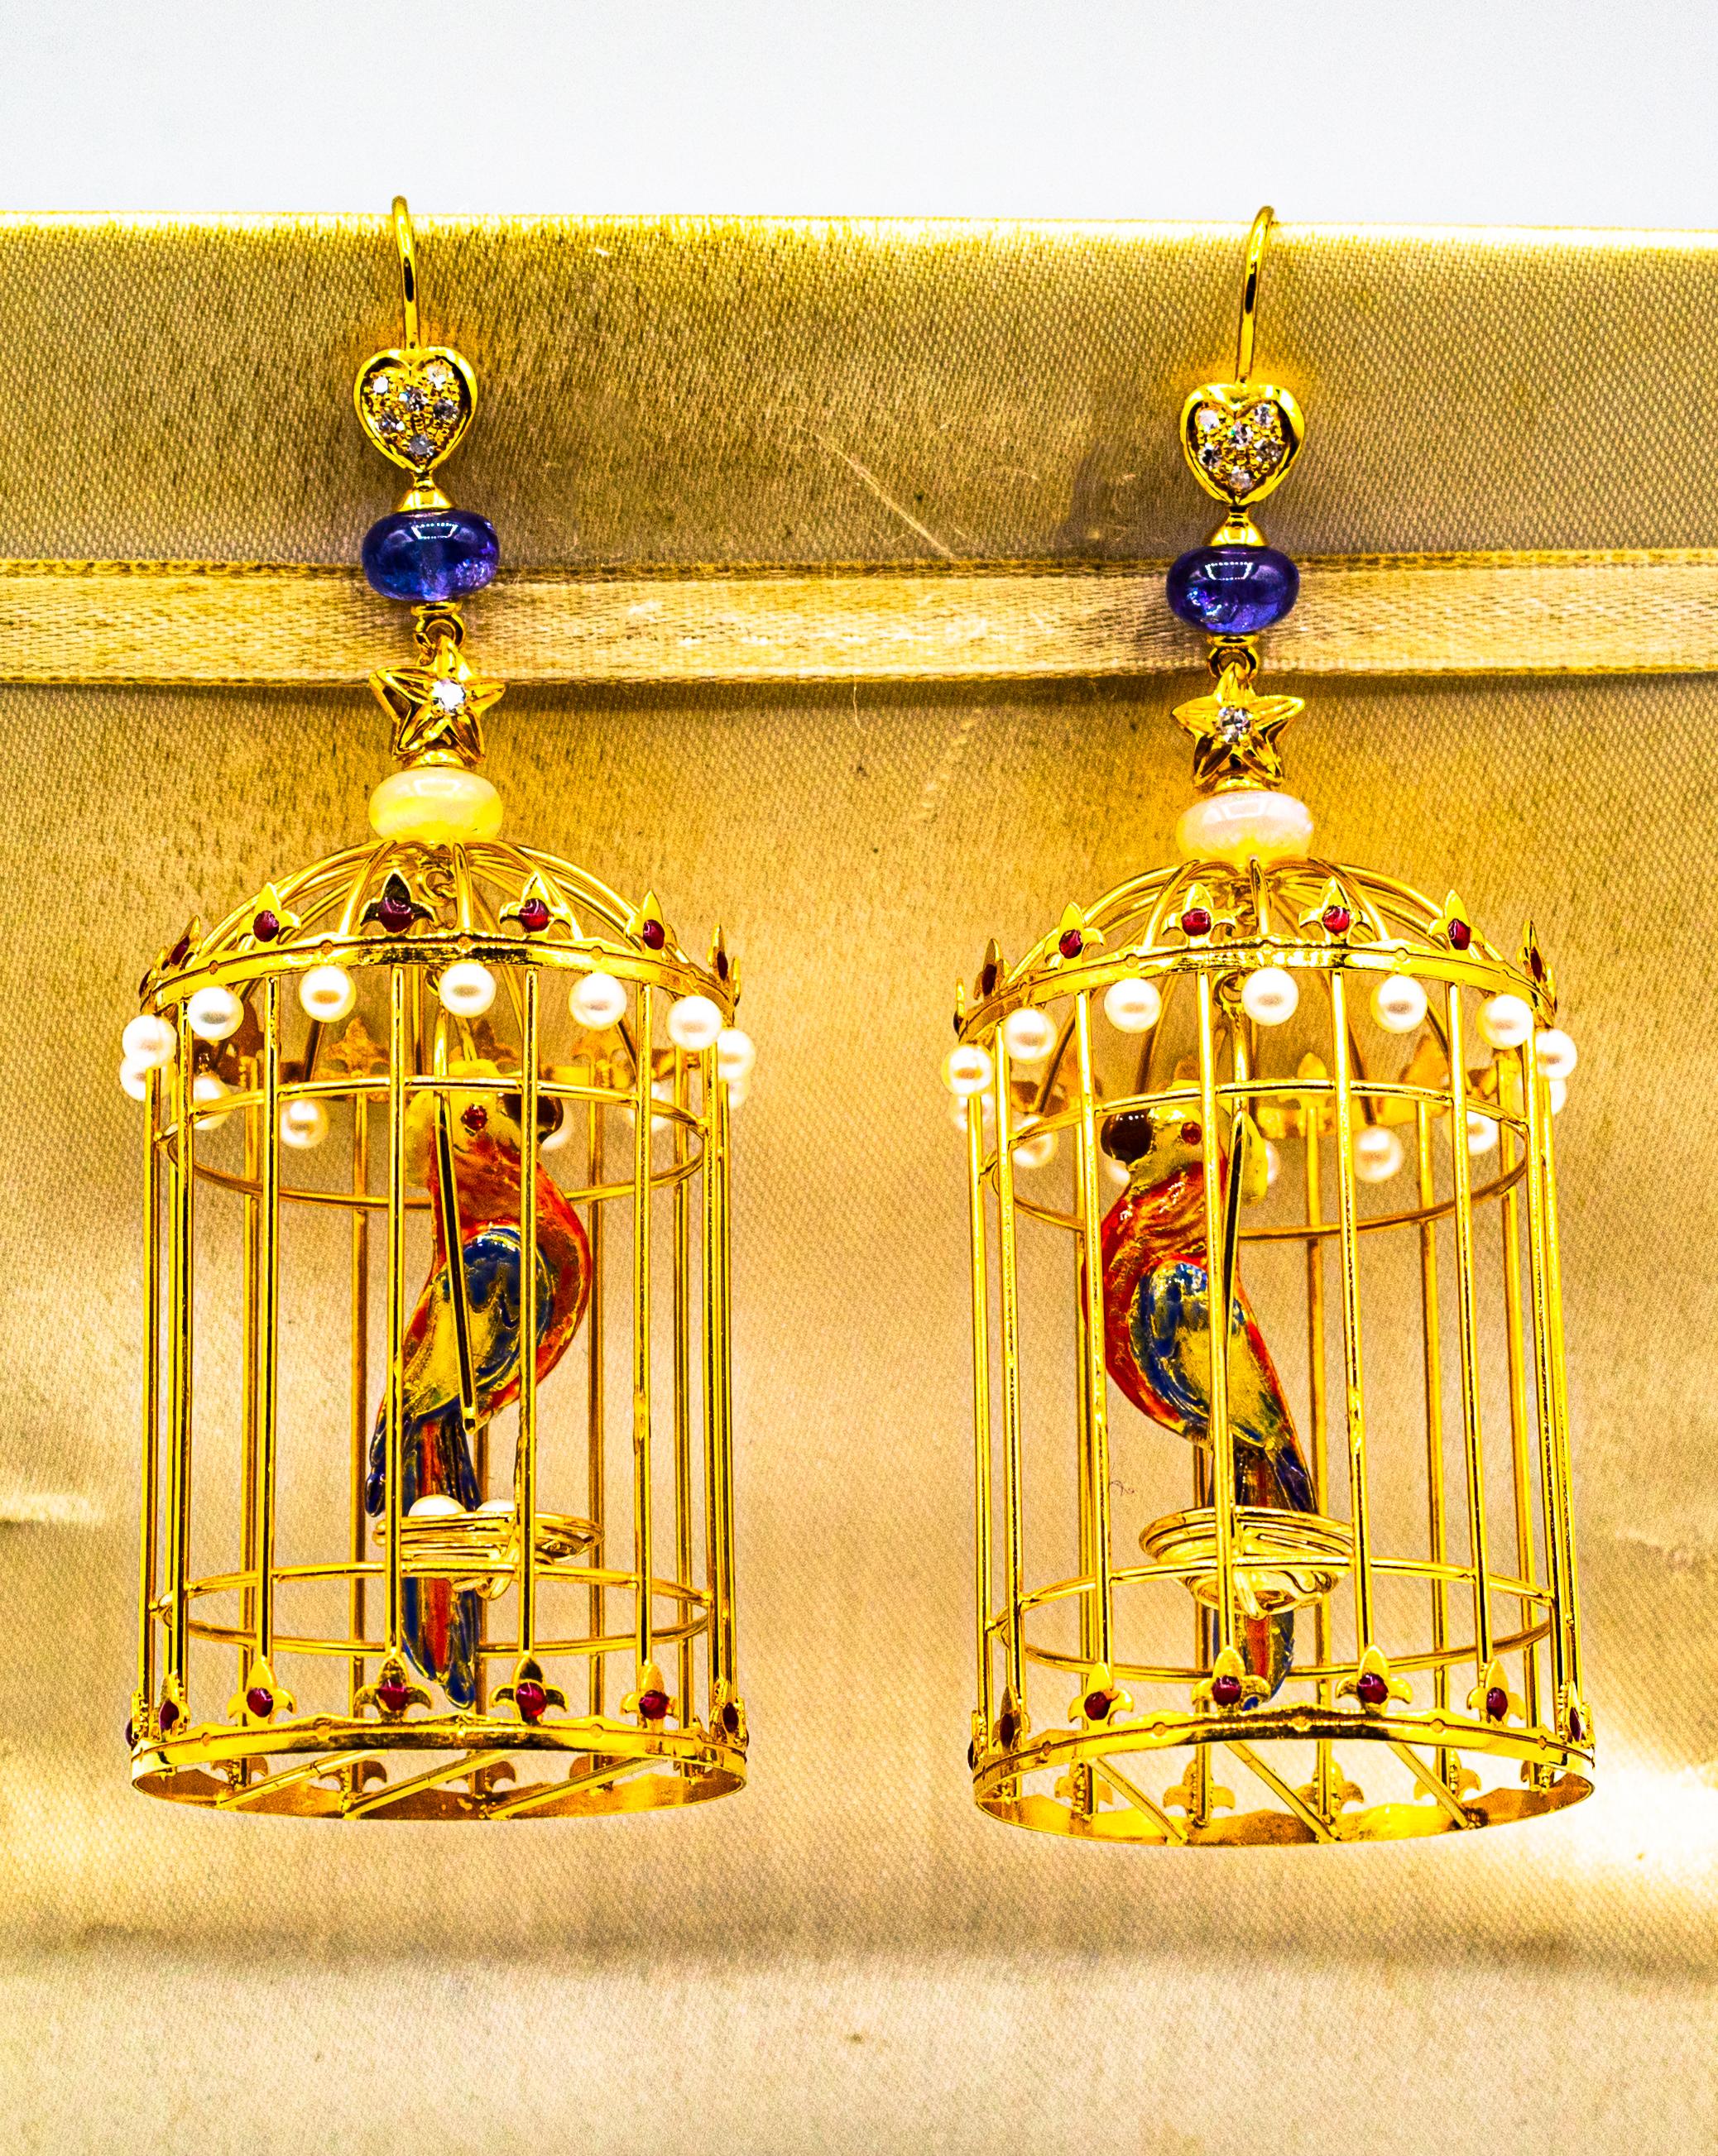 These Stud Earrings are made of 9K Yellow Gold and Sterling Silver.
These Earrings have 0.20 Carats of White Brilliant Cut Diamonds.
These Earrings have Opal and Tanzanite.
These Earrings have also Enamel and Pearls.

These Earrings are available